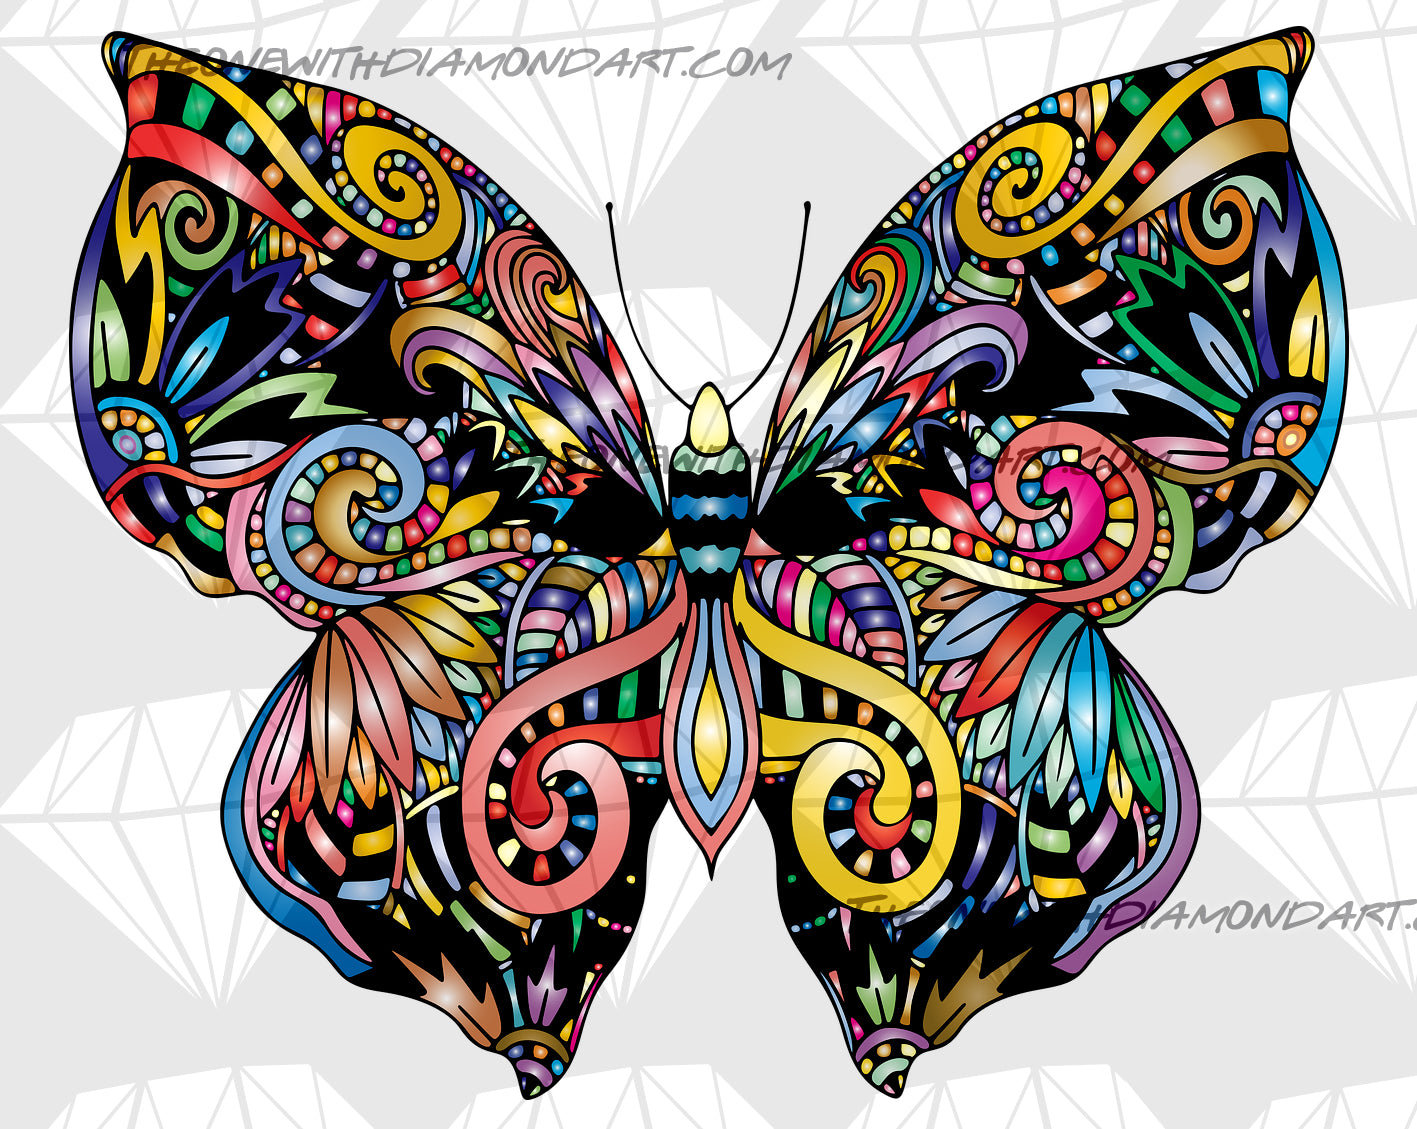 Mandala Butterfly – The One With The Diamond Art